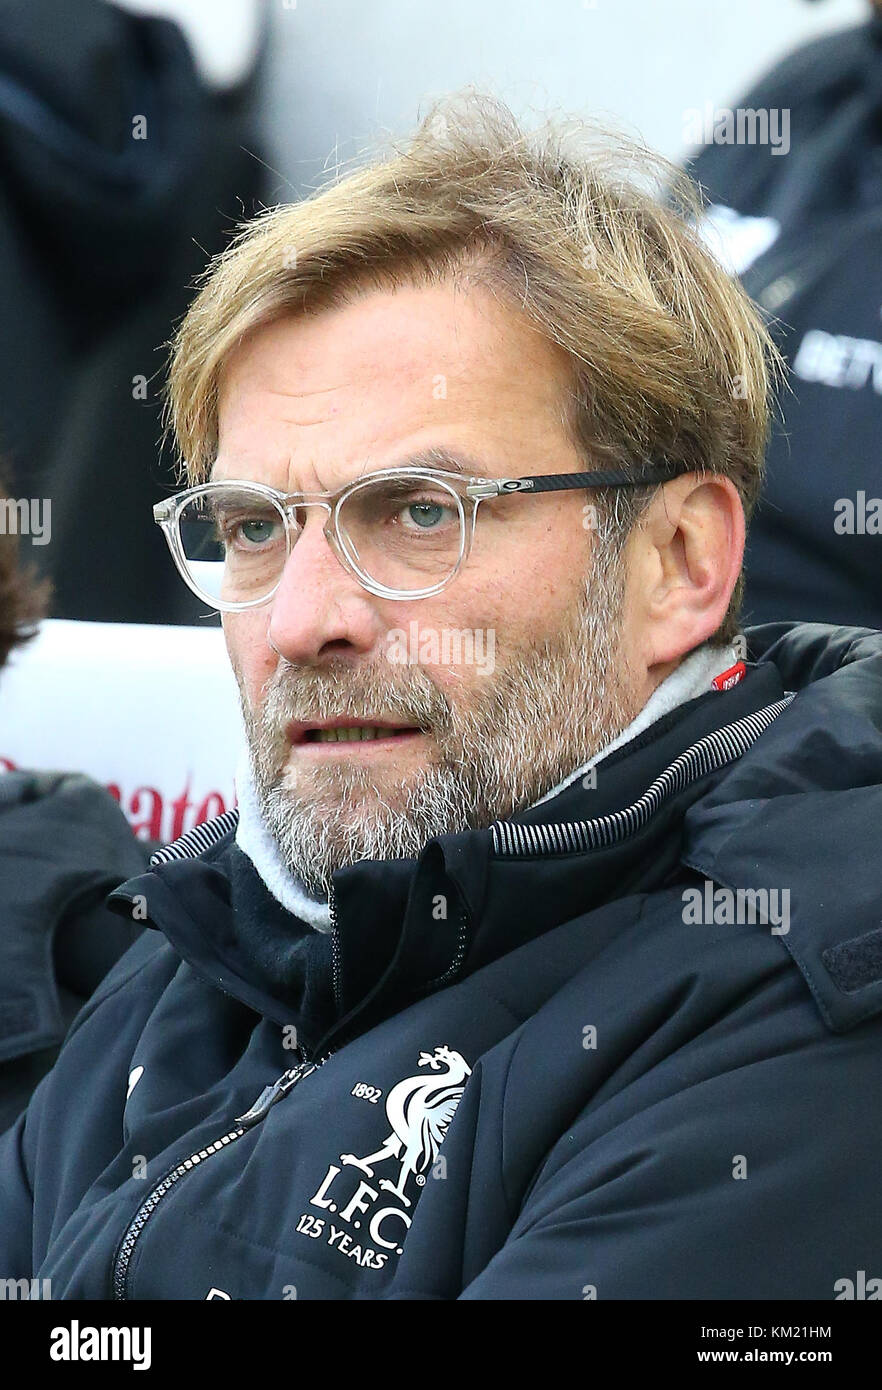 Liverpool manager Jurgen Klopp during the Premier League match between Brighton and Hove Albion and Liverpool at the American Express Community Stadium in Brighton and Hove. 02 Dec 2017 *** EDITORIAL USE ONLY *** FA Premier League and Football League images are subject to DataCo Licence see www.football-dataco.com Stock Photo